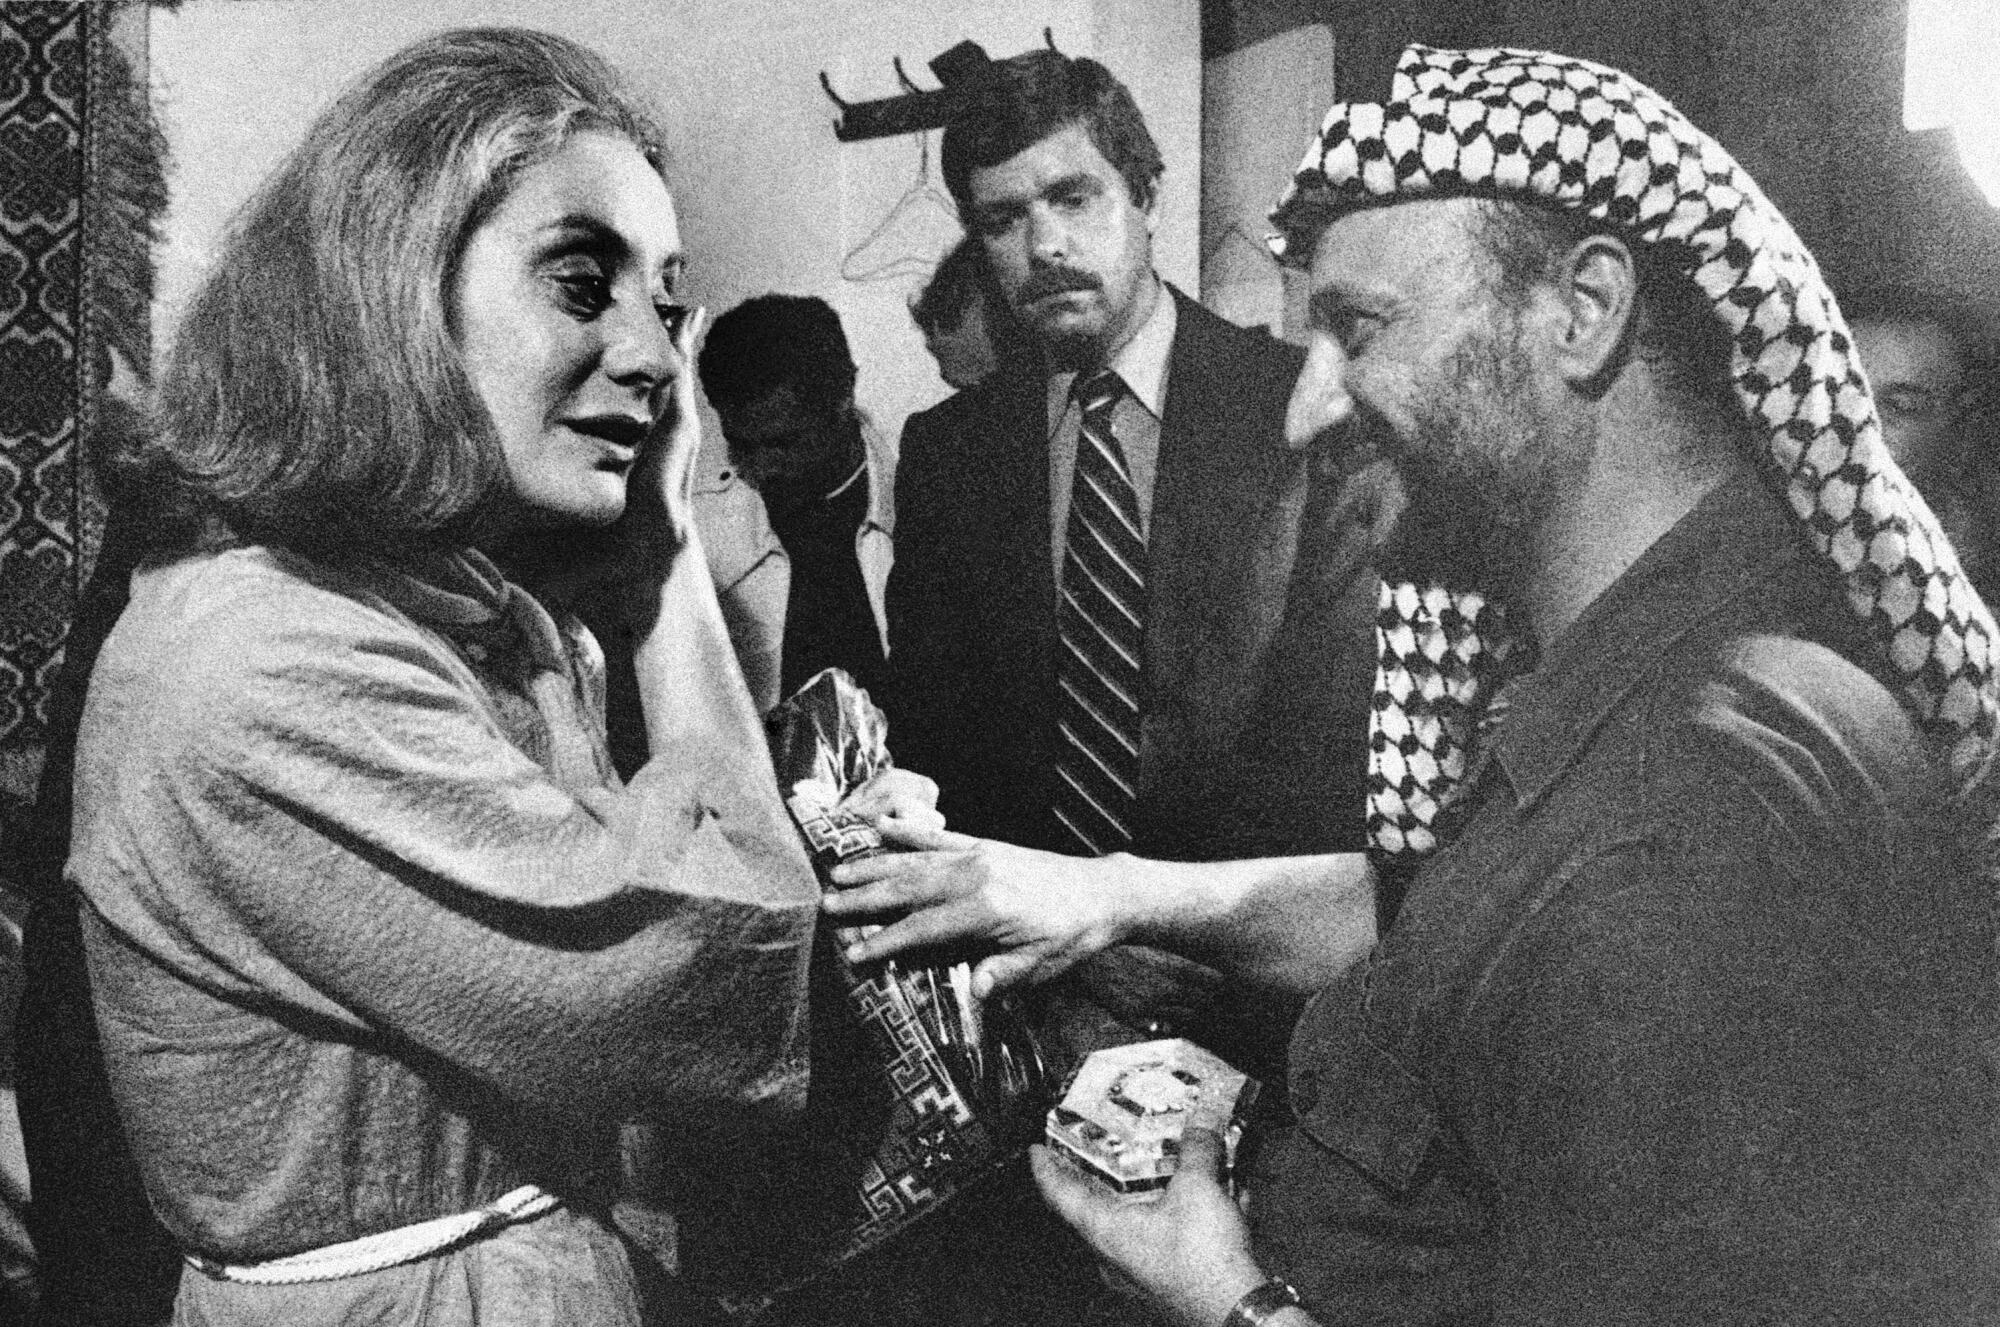 Walters with Palestinian leader Yasser Arafat in 1977 file